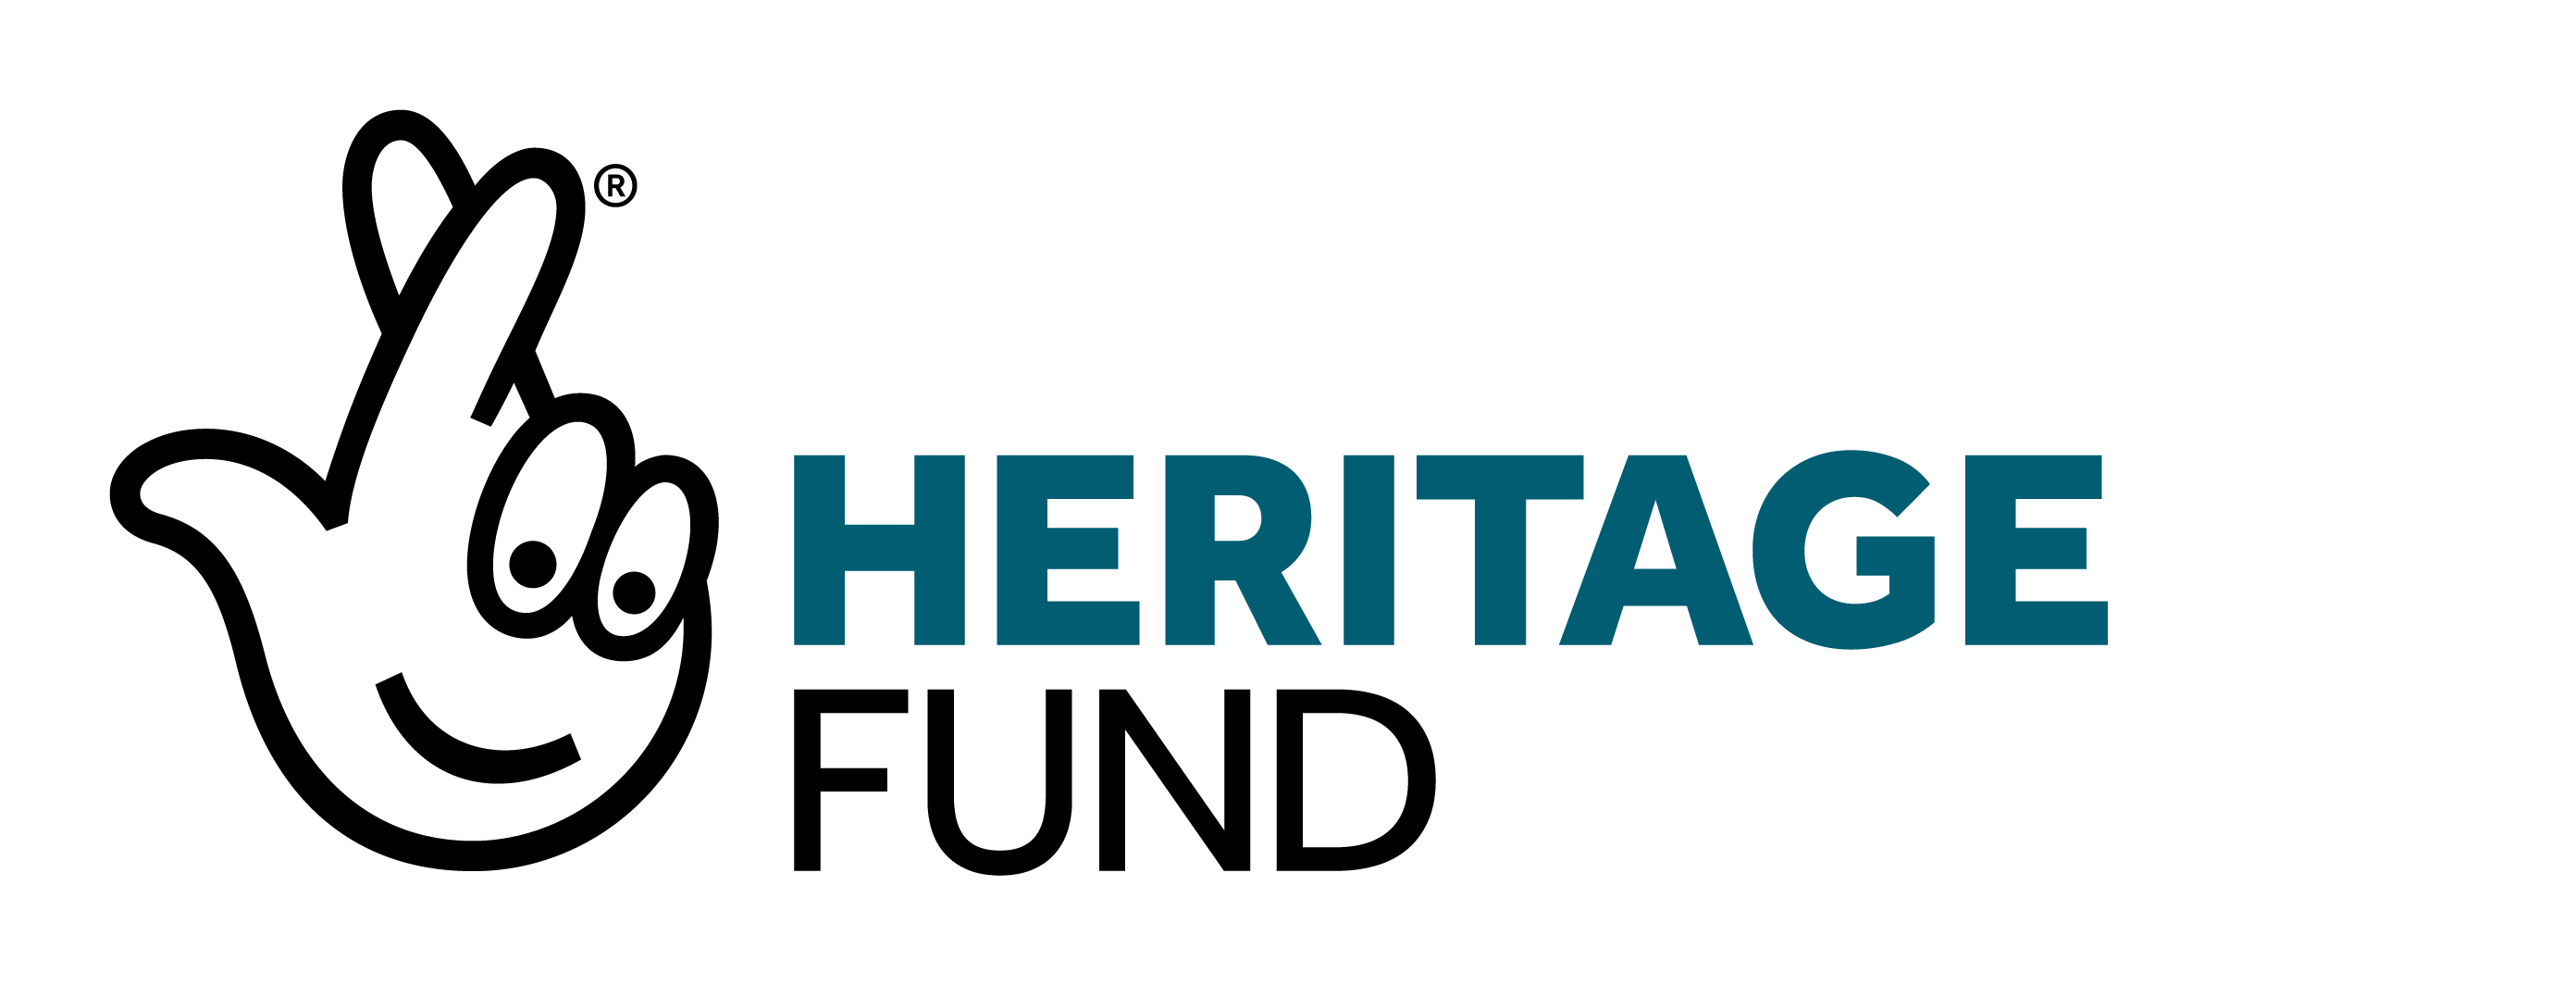 National Lottery Heritage Fund Logo showing a hand with crossed fingers